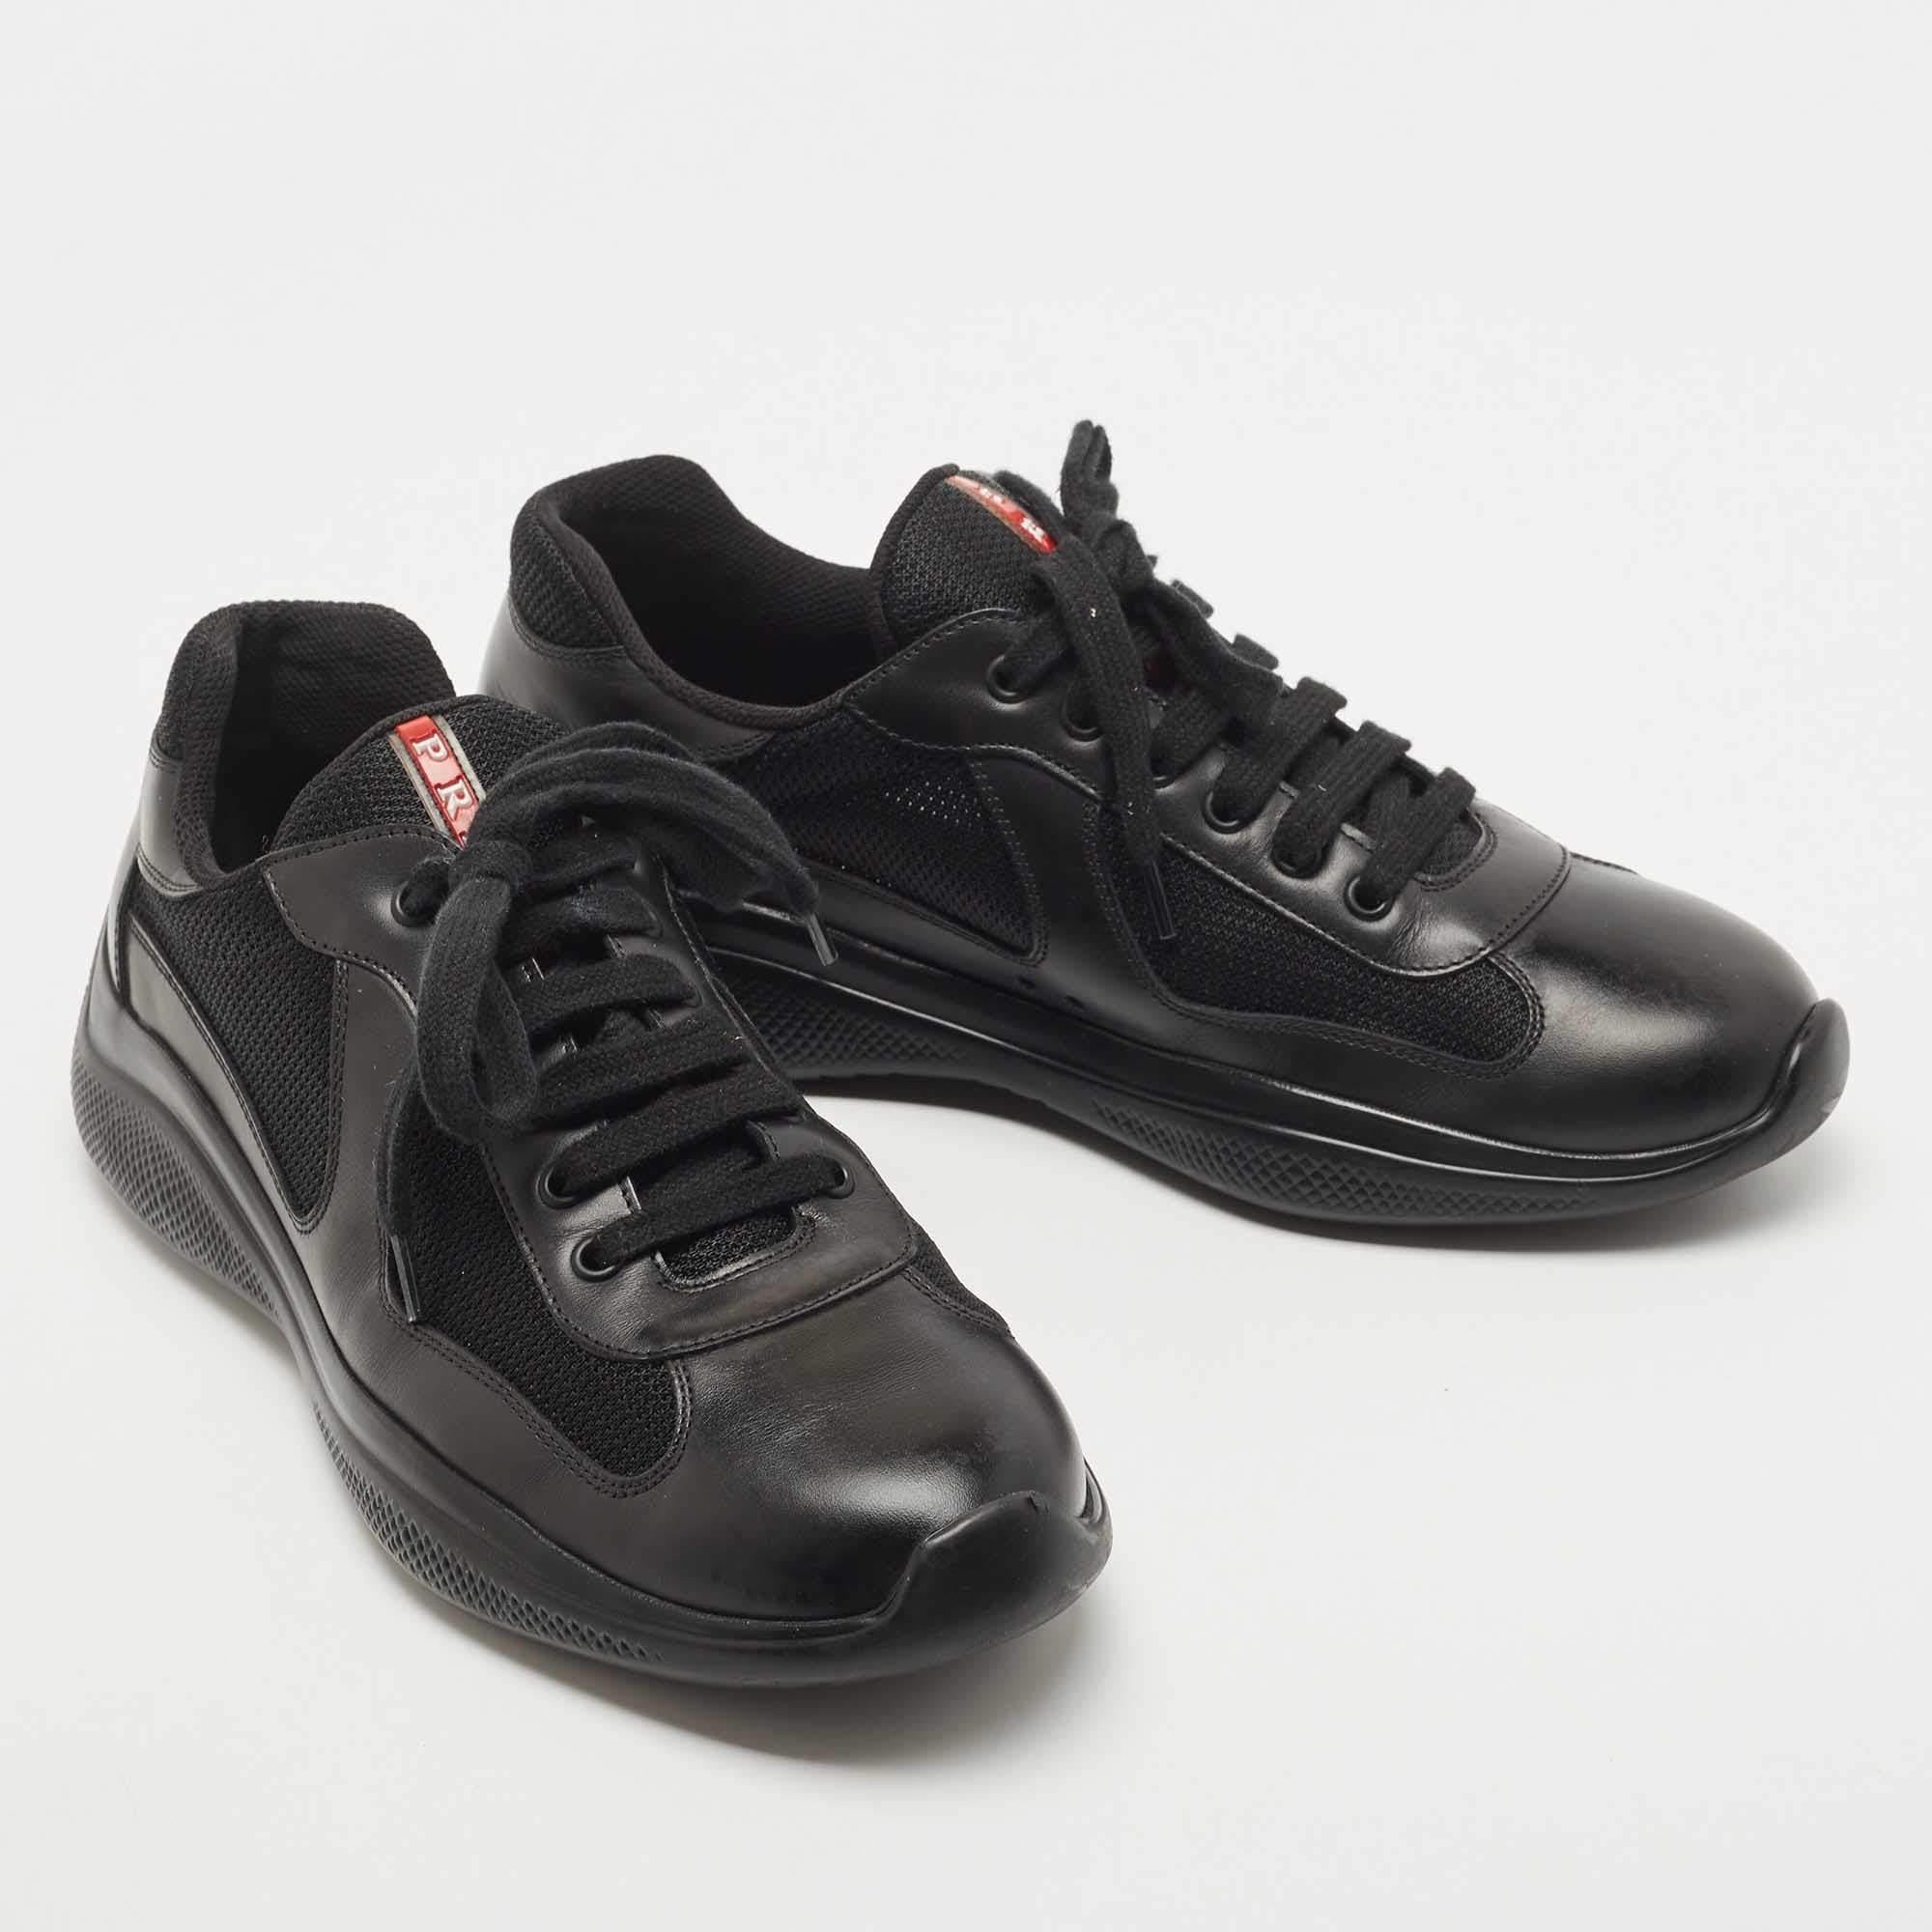 Prada Sports Black Leather and Mesh Low Top Sneakers Size 42 1